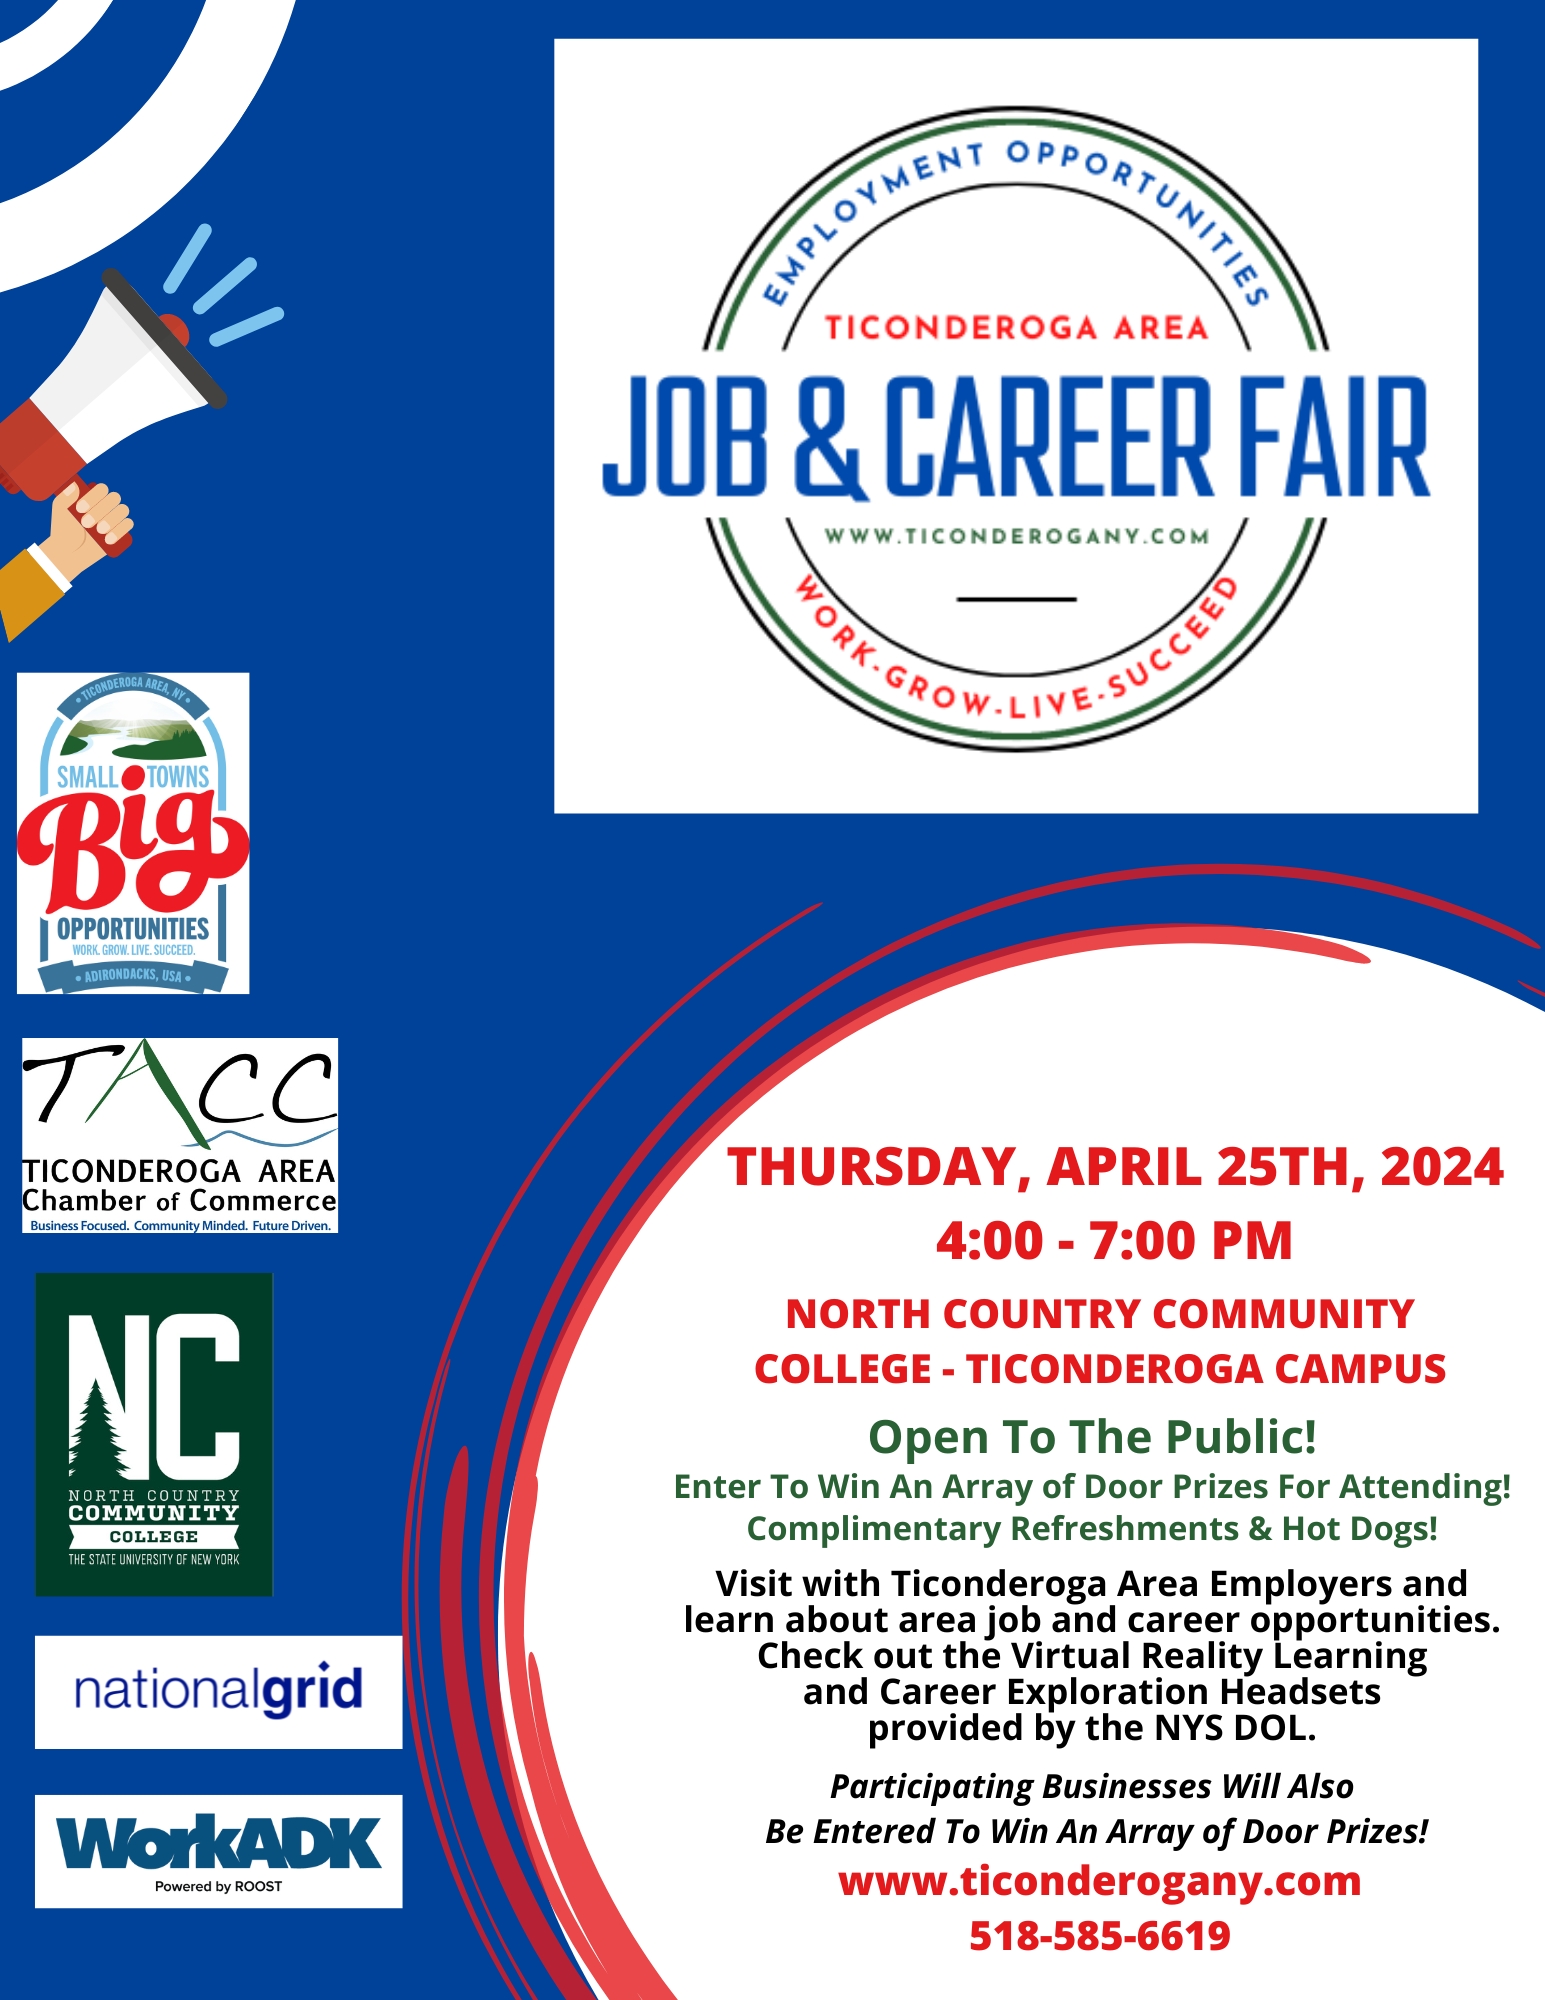 A flyer showcasing details of the Job and Career Fair in text with logos of participating organizers